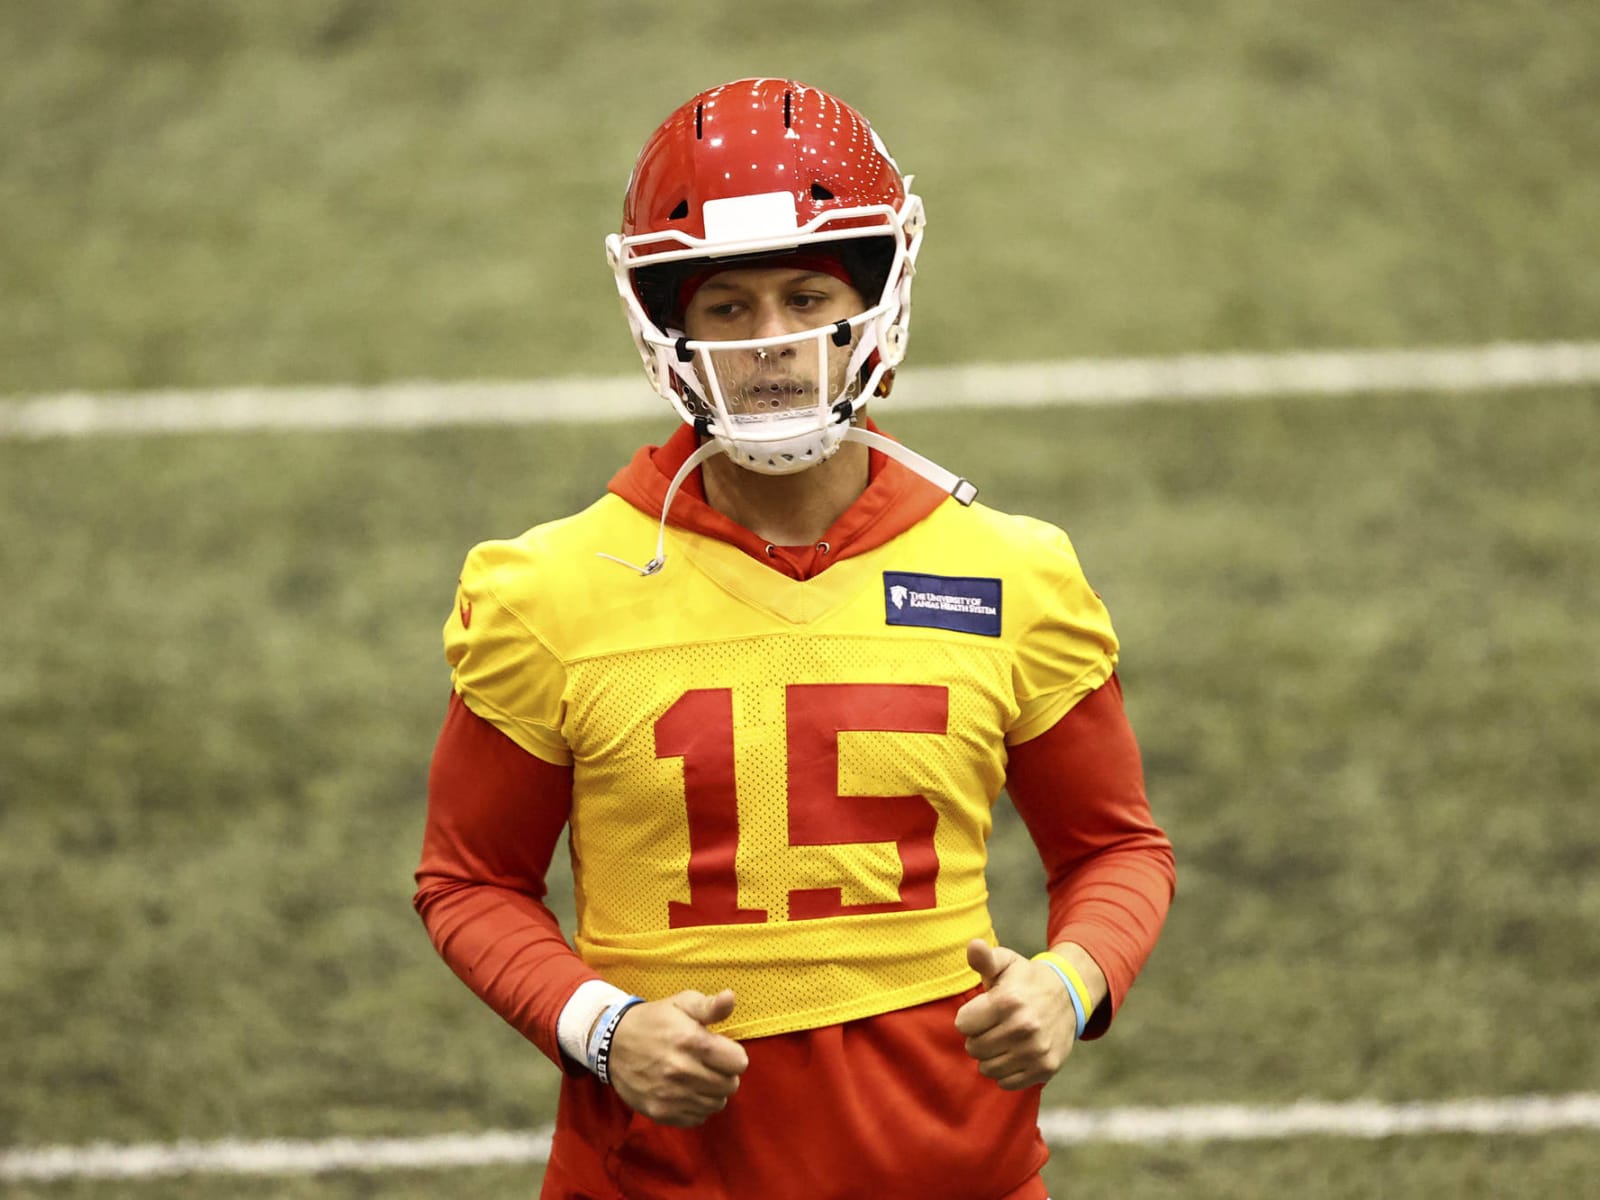 Patrick Mahomes Rookie Card Sells For $4.3 Mil, Most Expensive